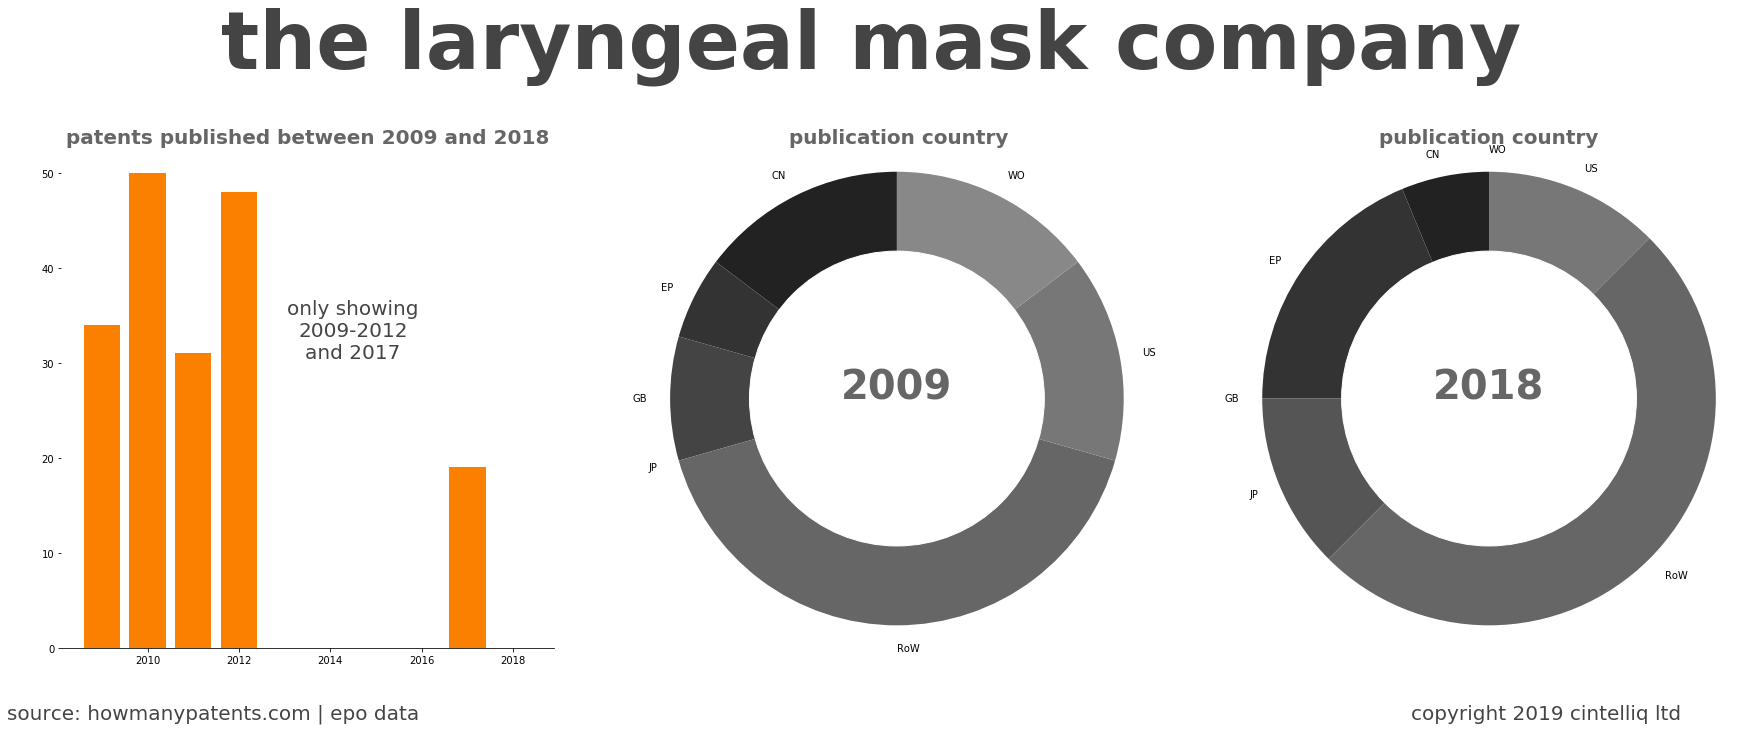 summary of patents for The Laryngeal Mask Company